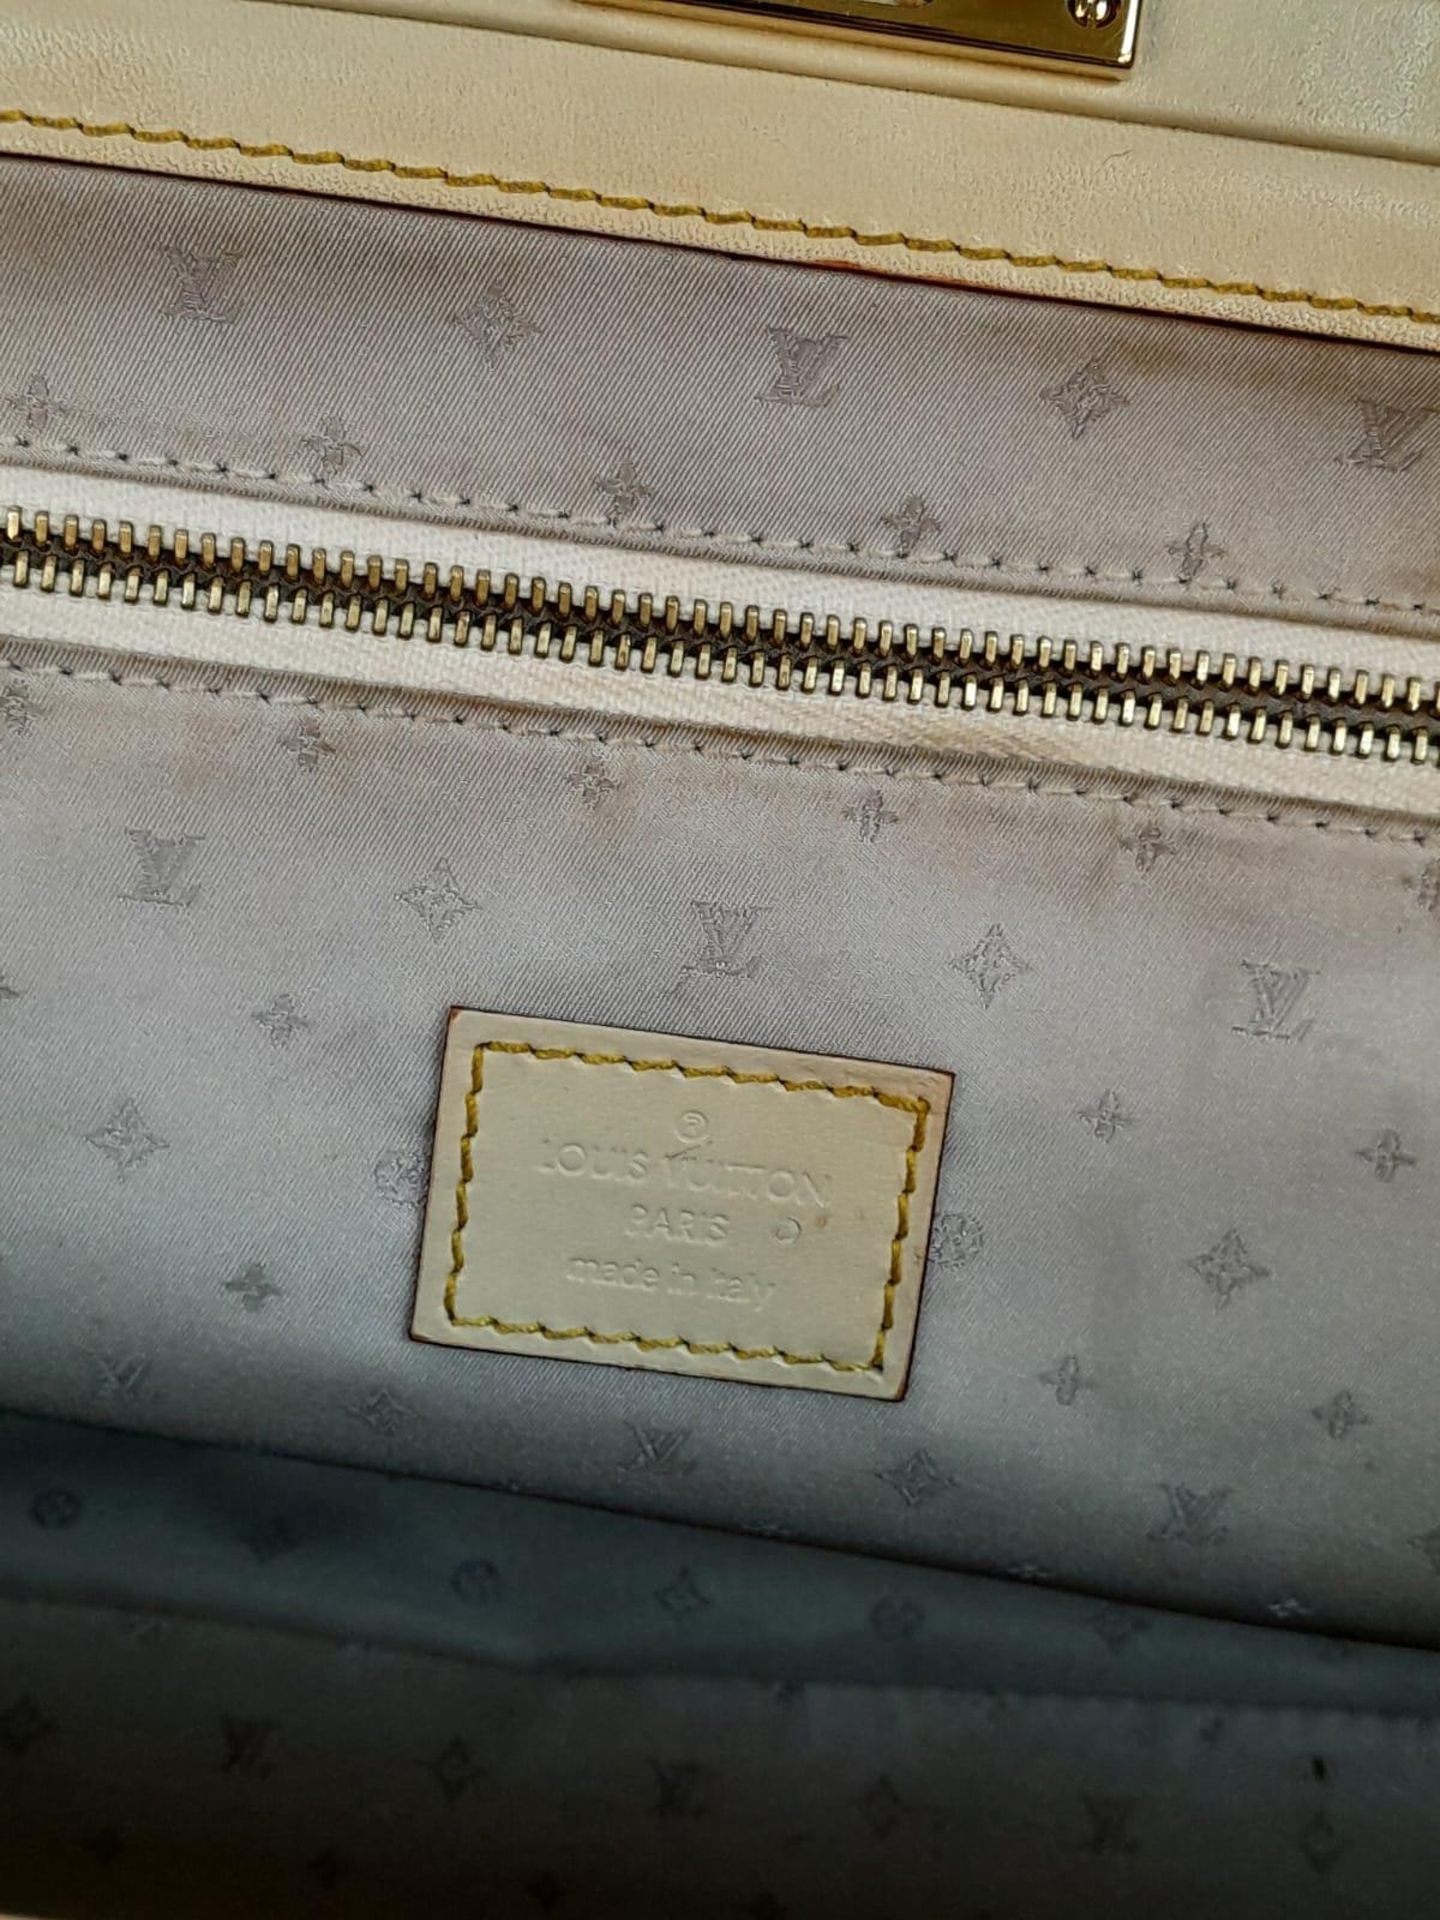 A Louis Vuitton Manhattan PM Suhali Leather Handbag. Soft white textured leather exterior with - Image 7 of 8